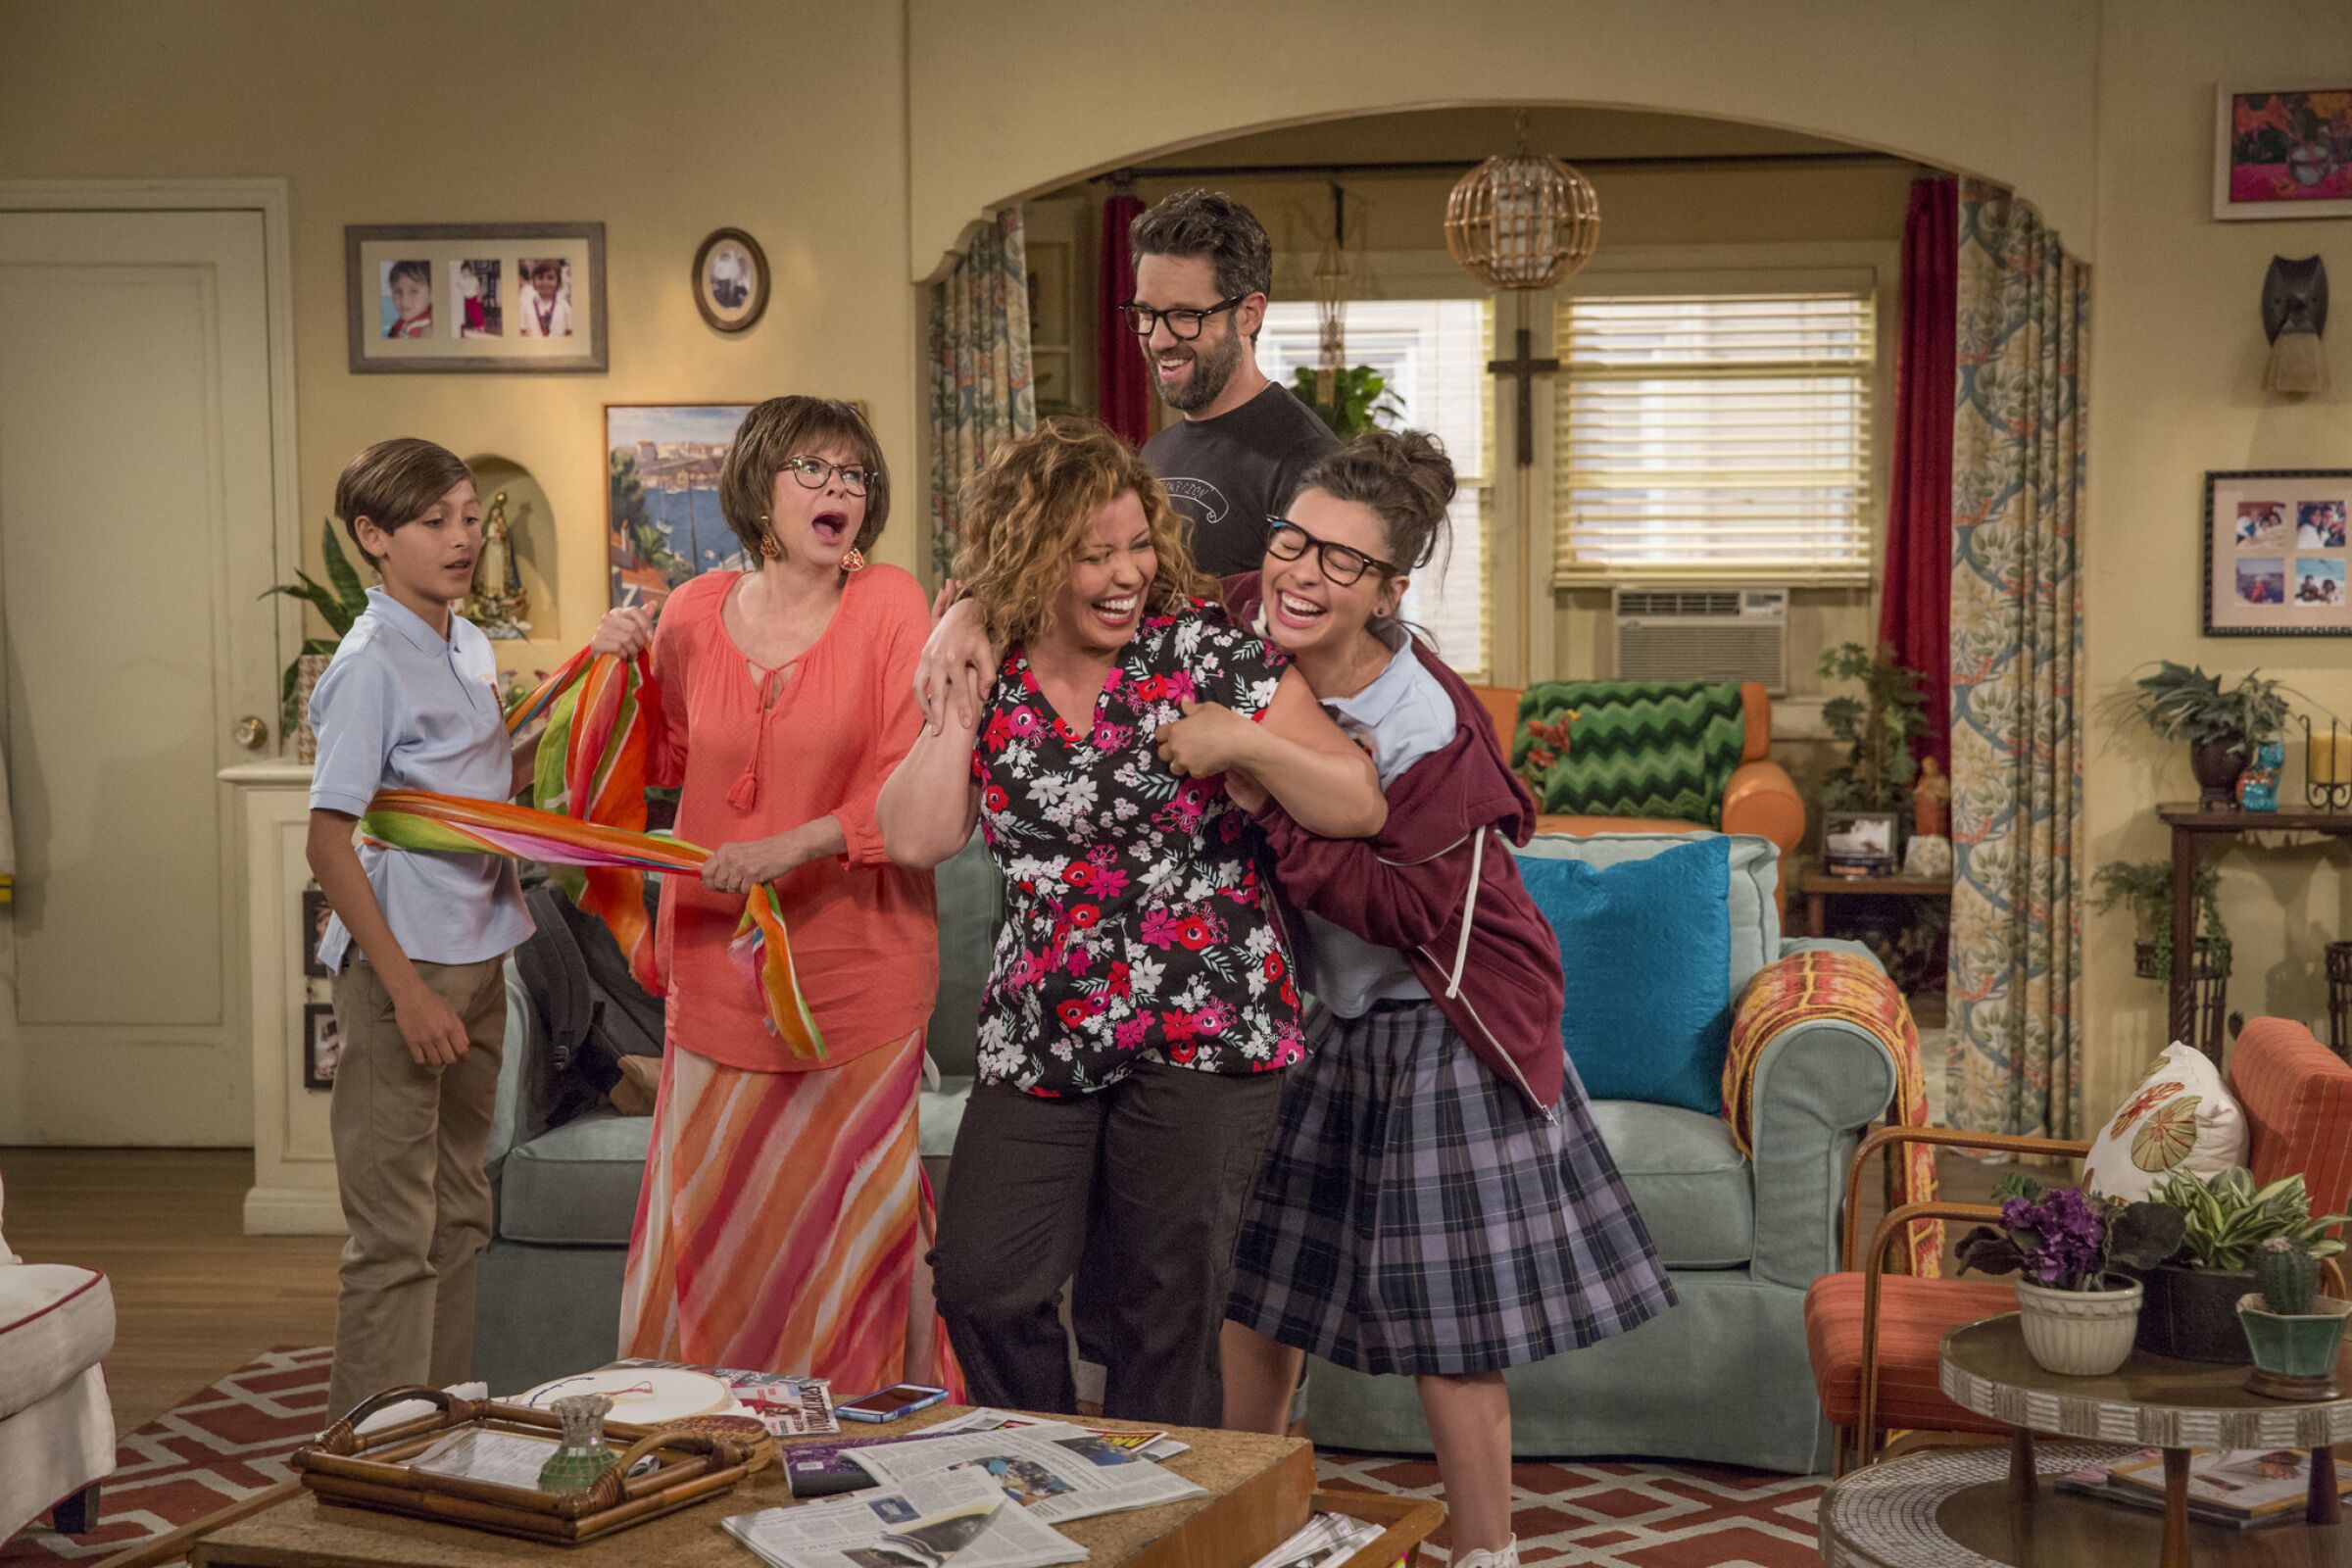 The cast of "One Day at a Time," which had its four-season run cut short in 2020.